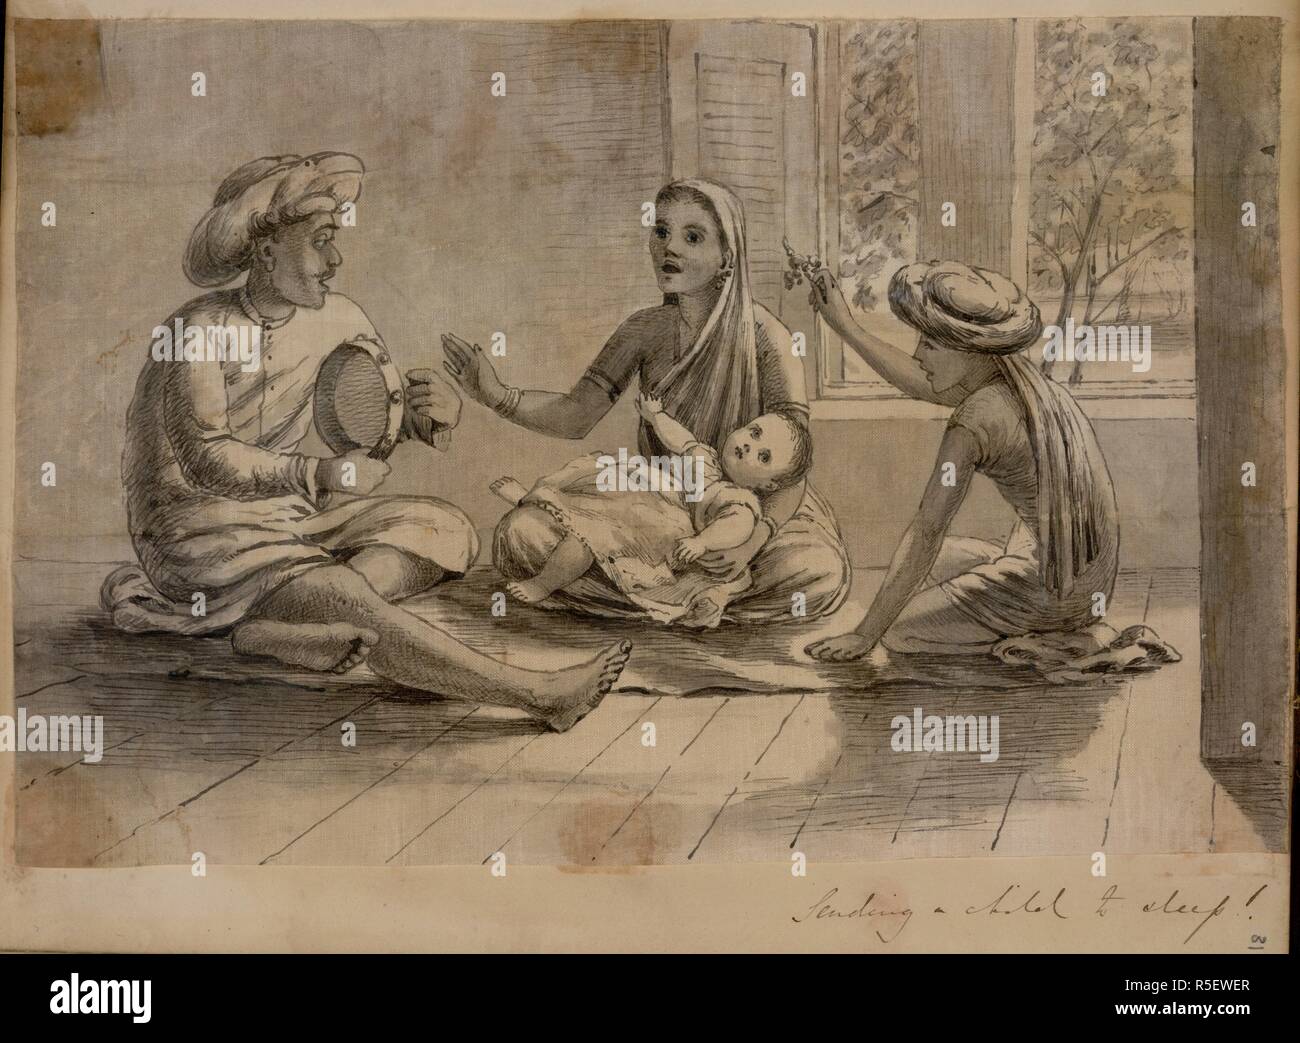 â€˜Sending a child to sleepâ€™!. Three figures attempting to get a child to go to sleep. Album with sixty-seven humorous drawings of domestic and social life, mainly in Western India, made soon after the Hancocksâ€™ arrival. 1865 - 1866. Source: WD 3871, f.31. Language: English. Stock Photo